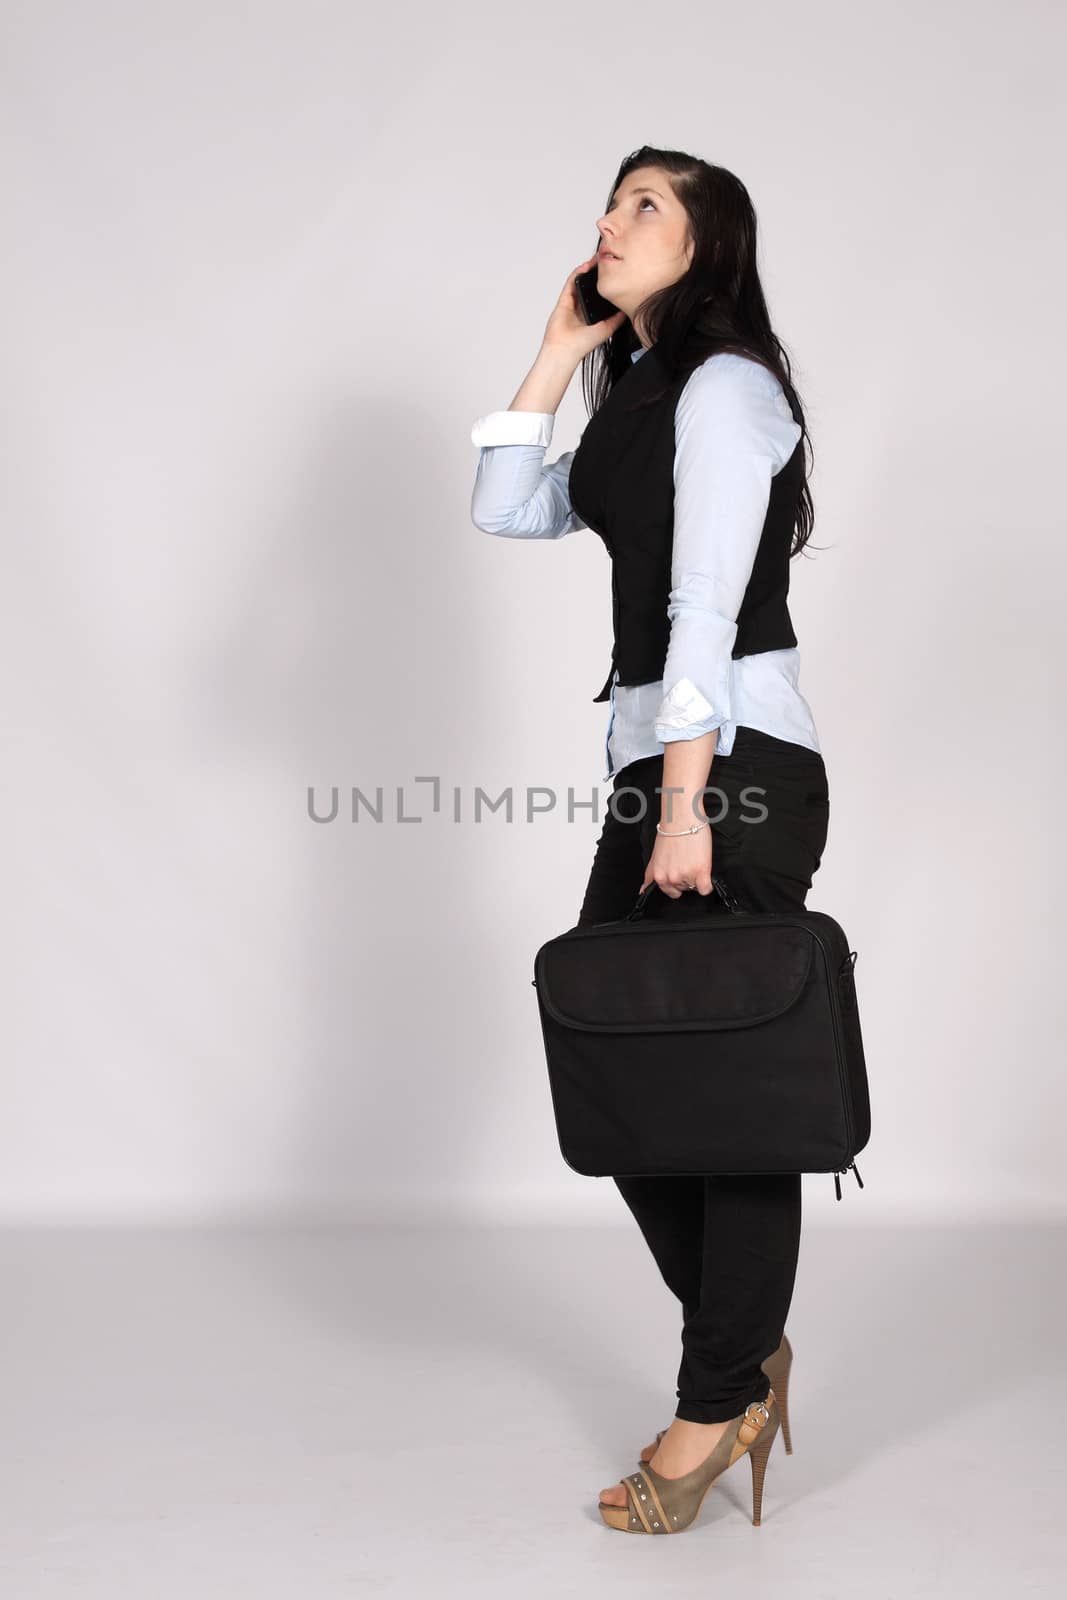 Young woman standing with laptop bag and phone